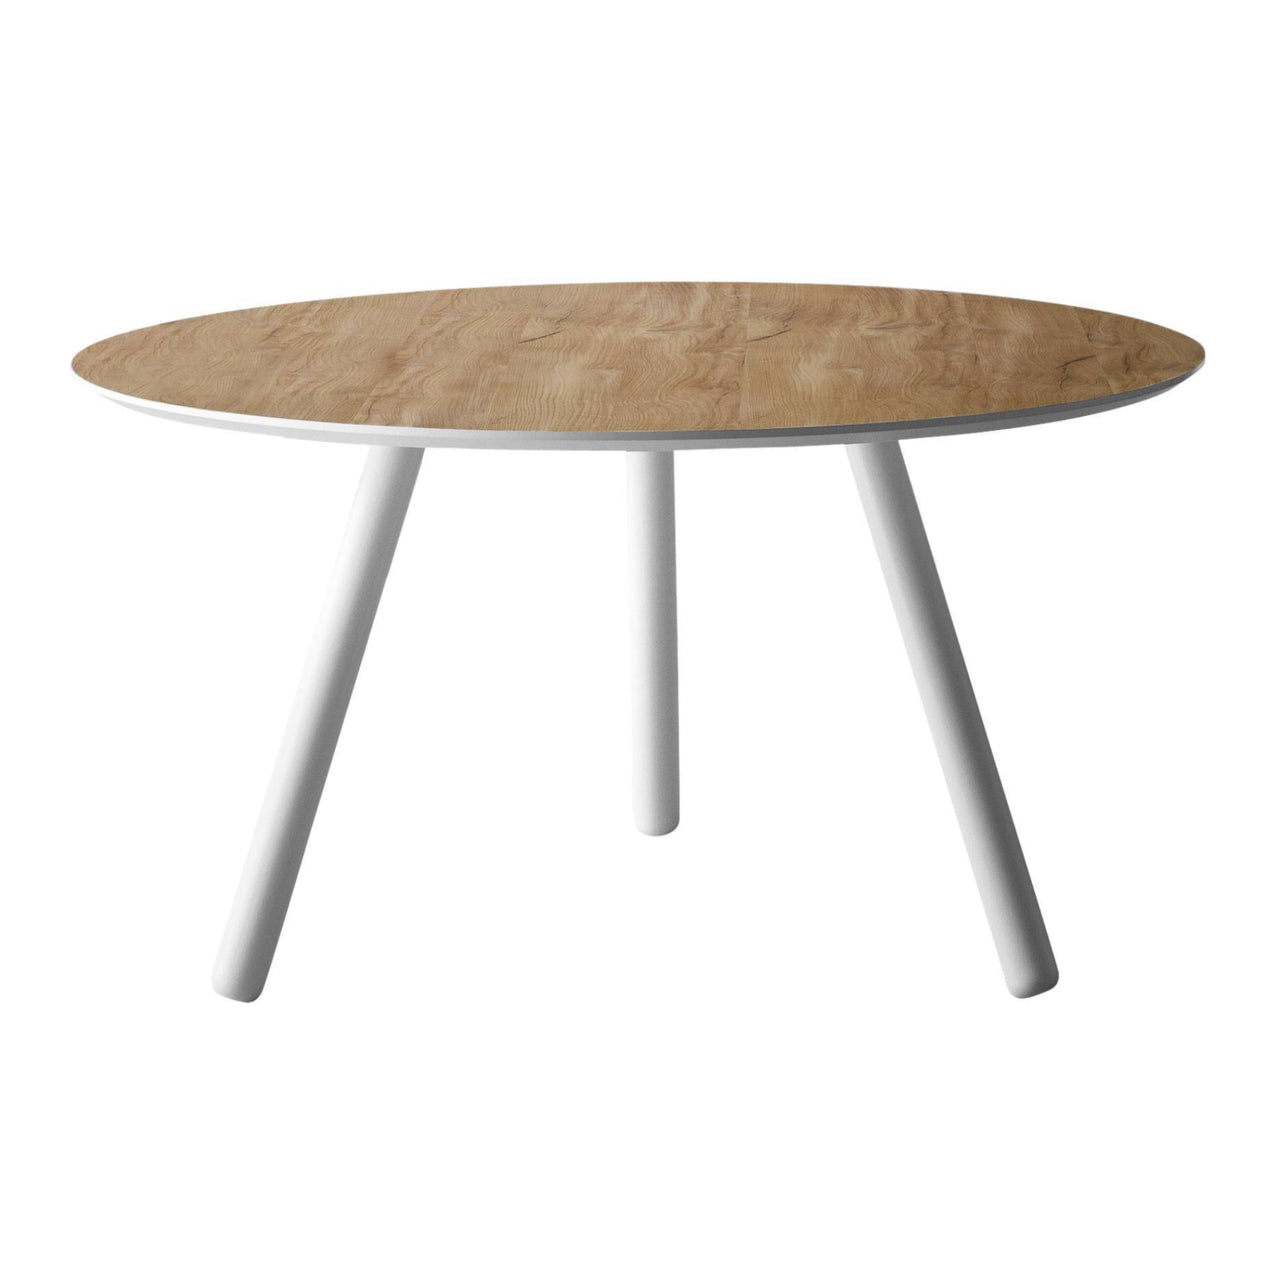 Pixie Round Table: Large + Vintage Oak + Lacquered White